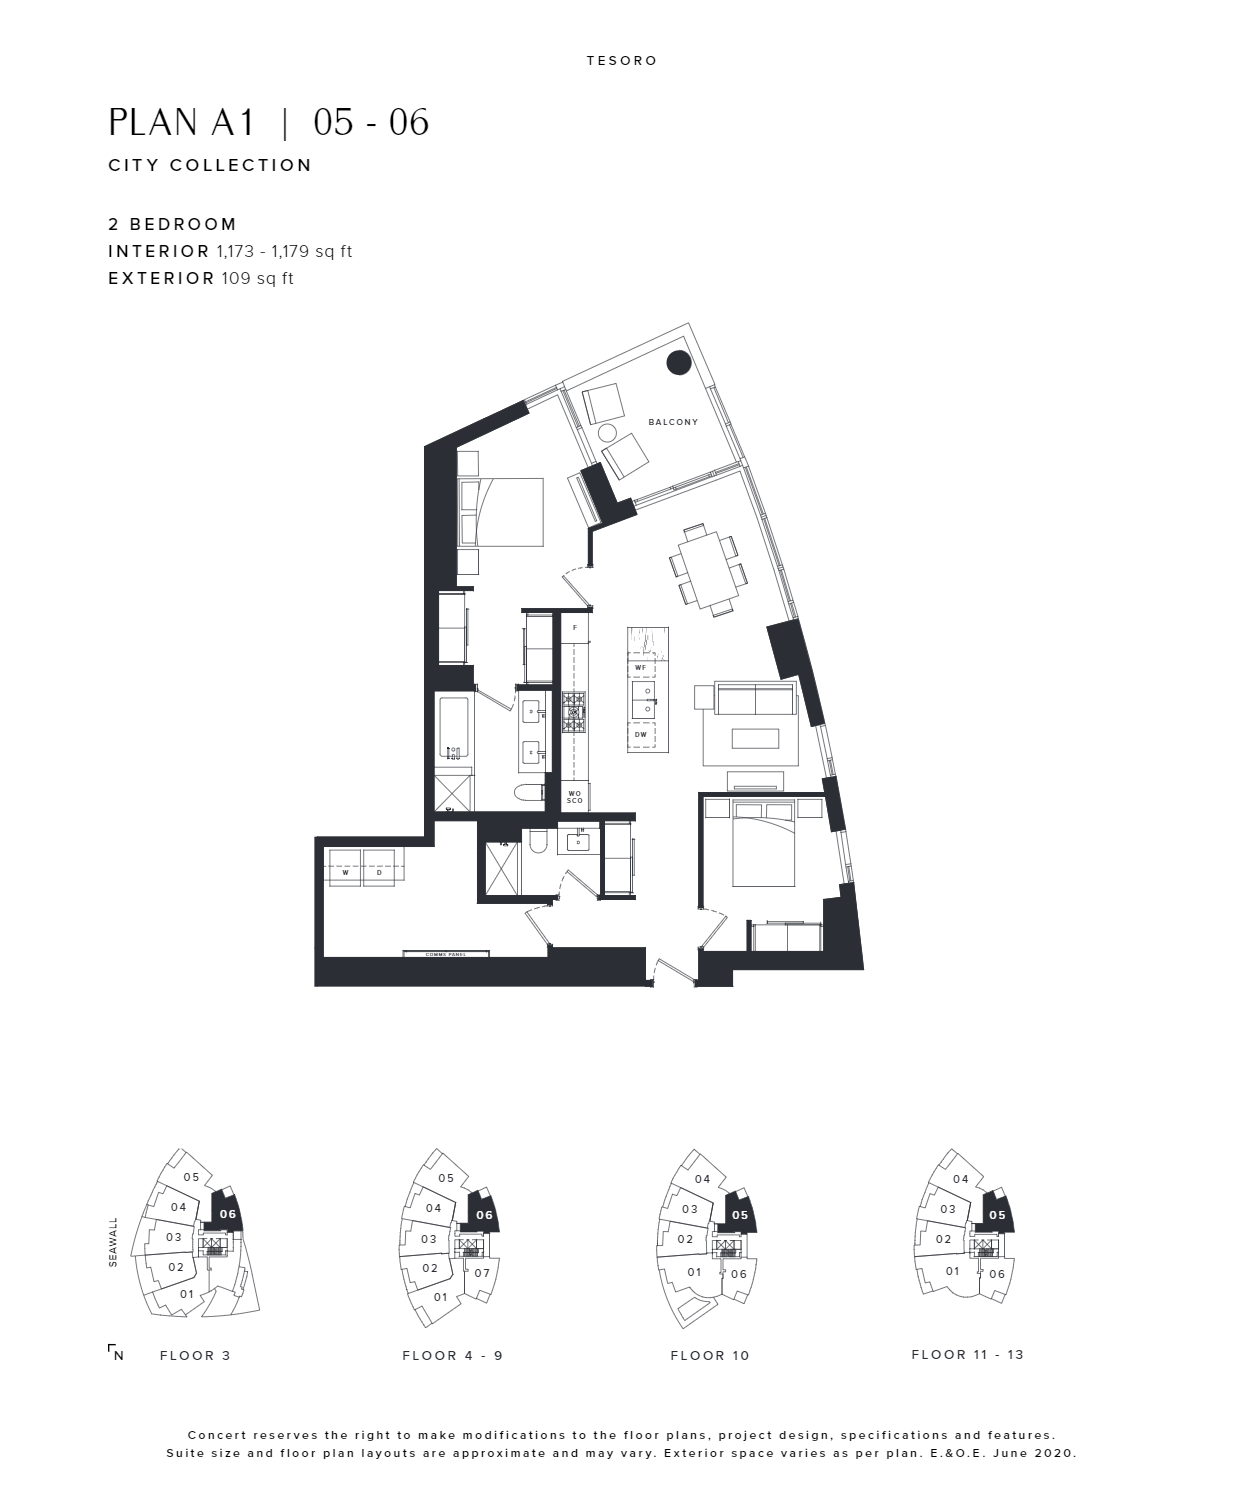 A1 | 05-06 Floor Plan of Tesoro Condos with undefined beds